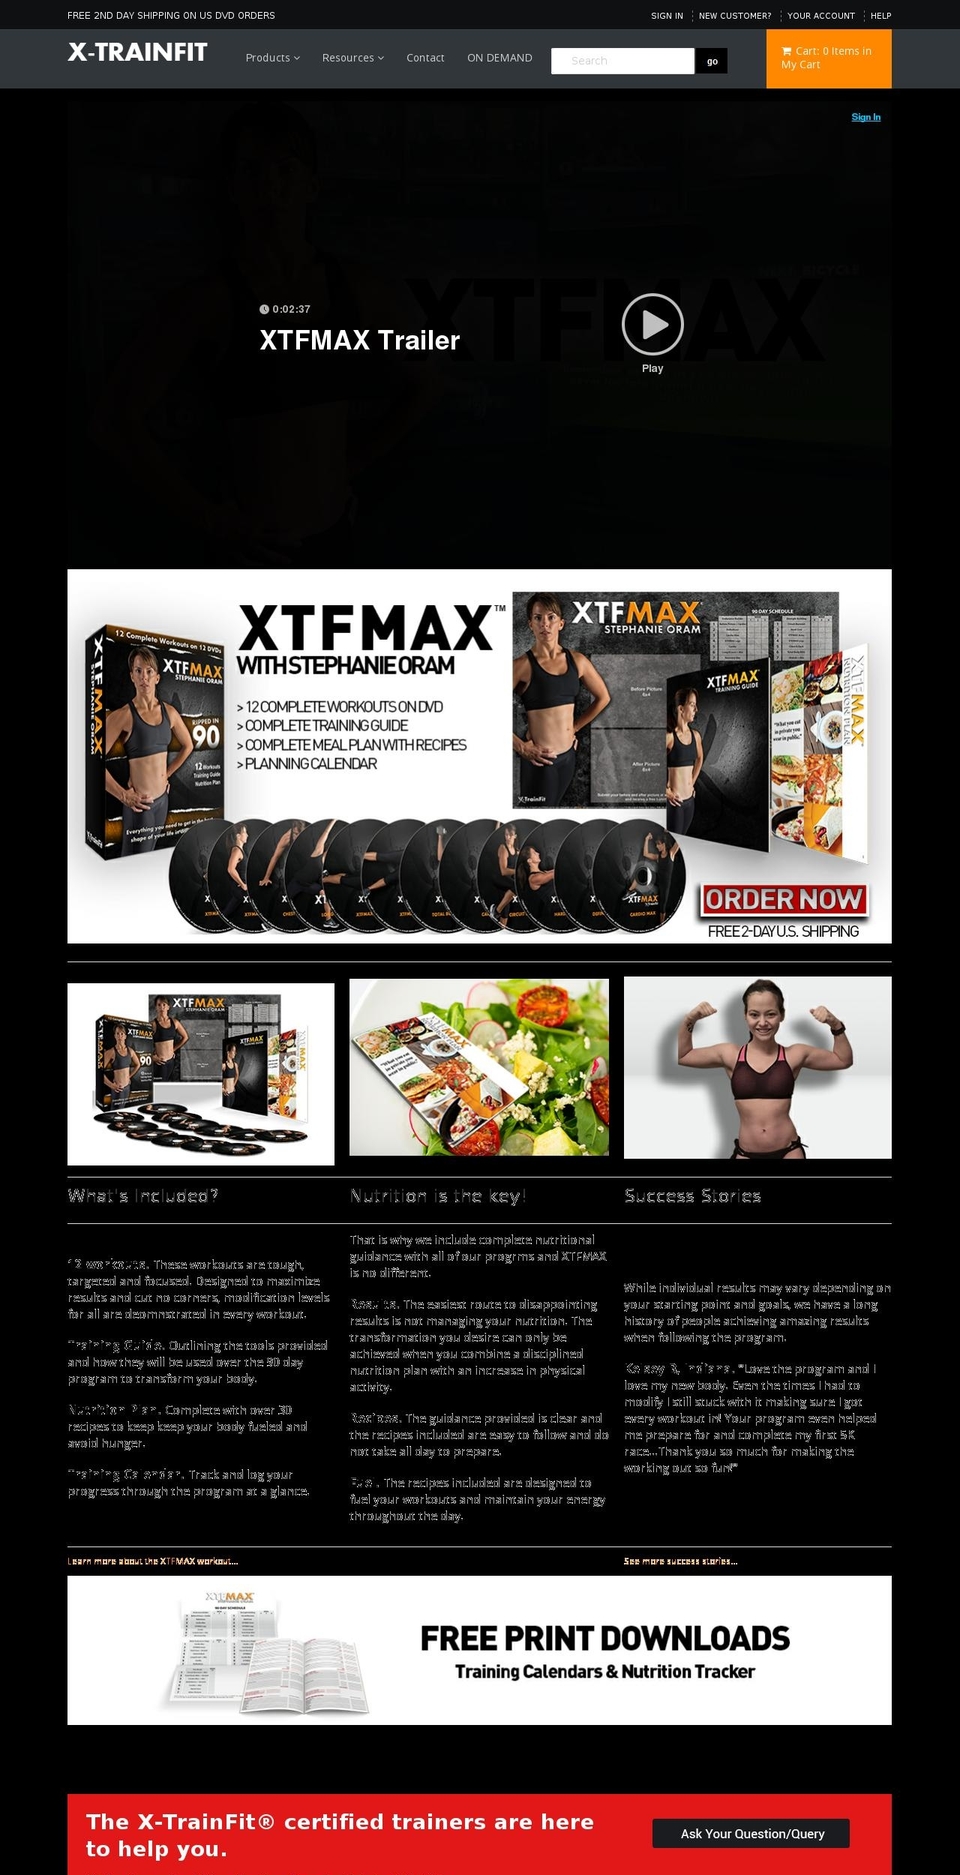 X-trainfit Shopify theme site example xtfmax.net